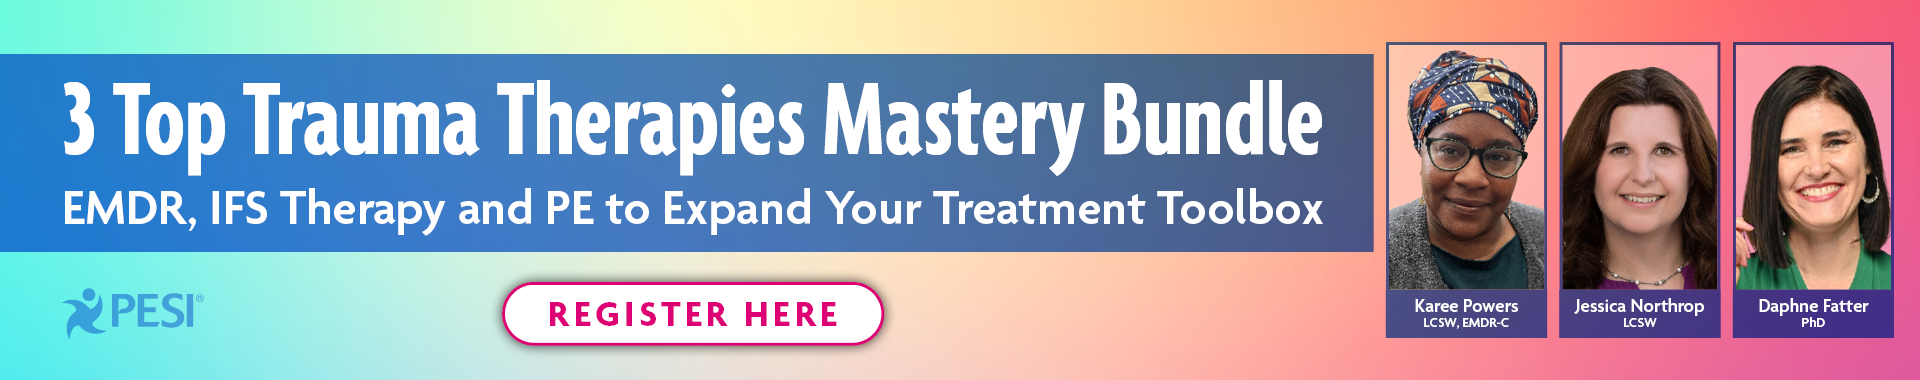 3 Top Trauma Therapies Mastery Bundle: EMDR, IFS Therapy, and PE to Expand Your Treatment Toolbox